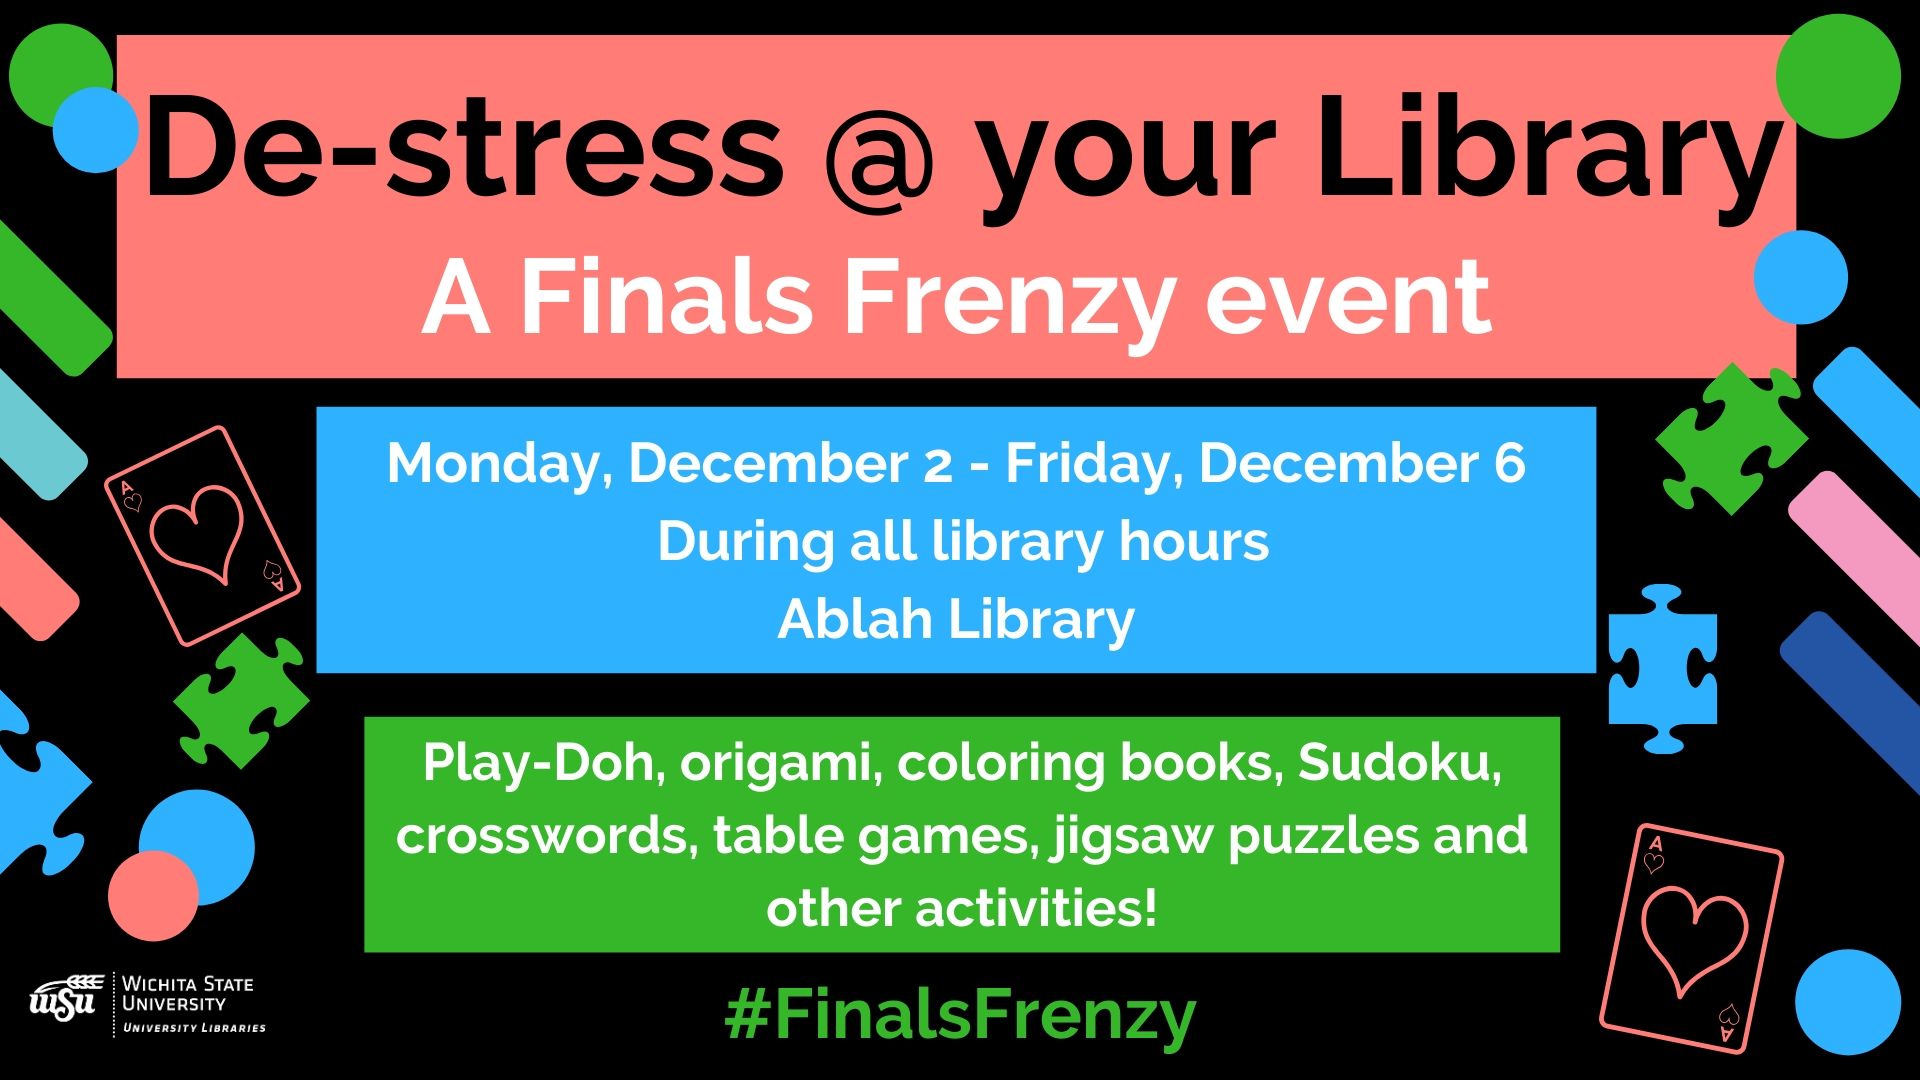 De-stress at your Library during Finals Week